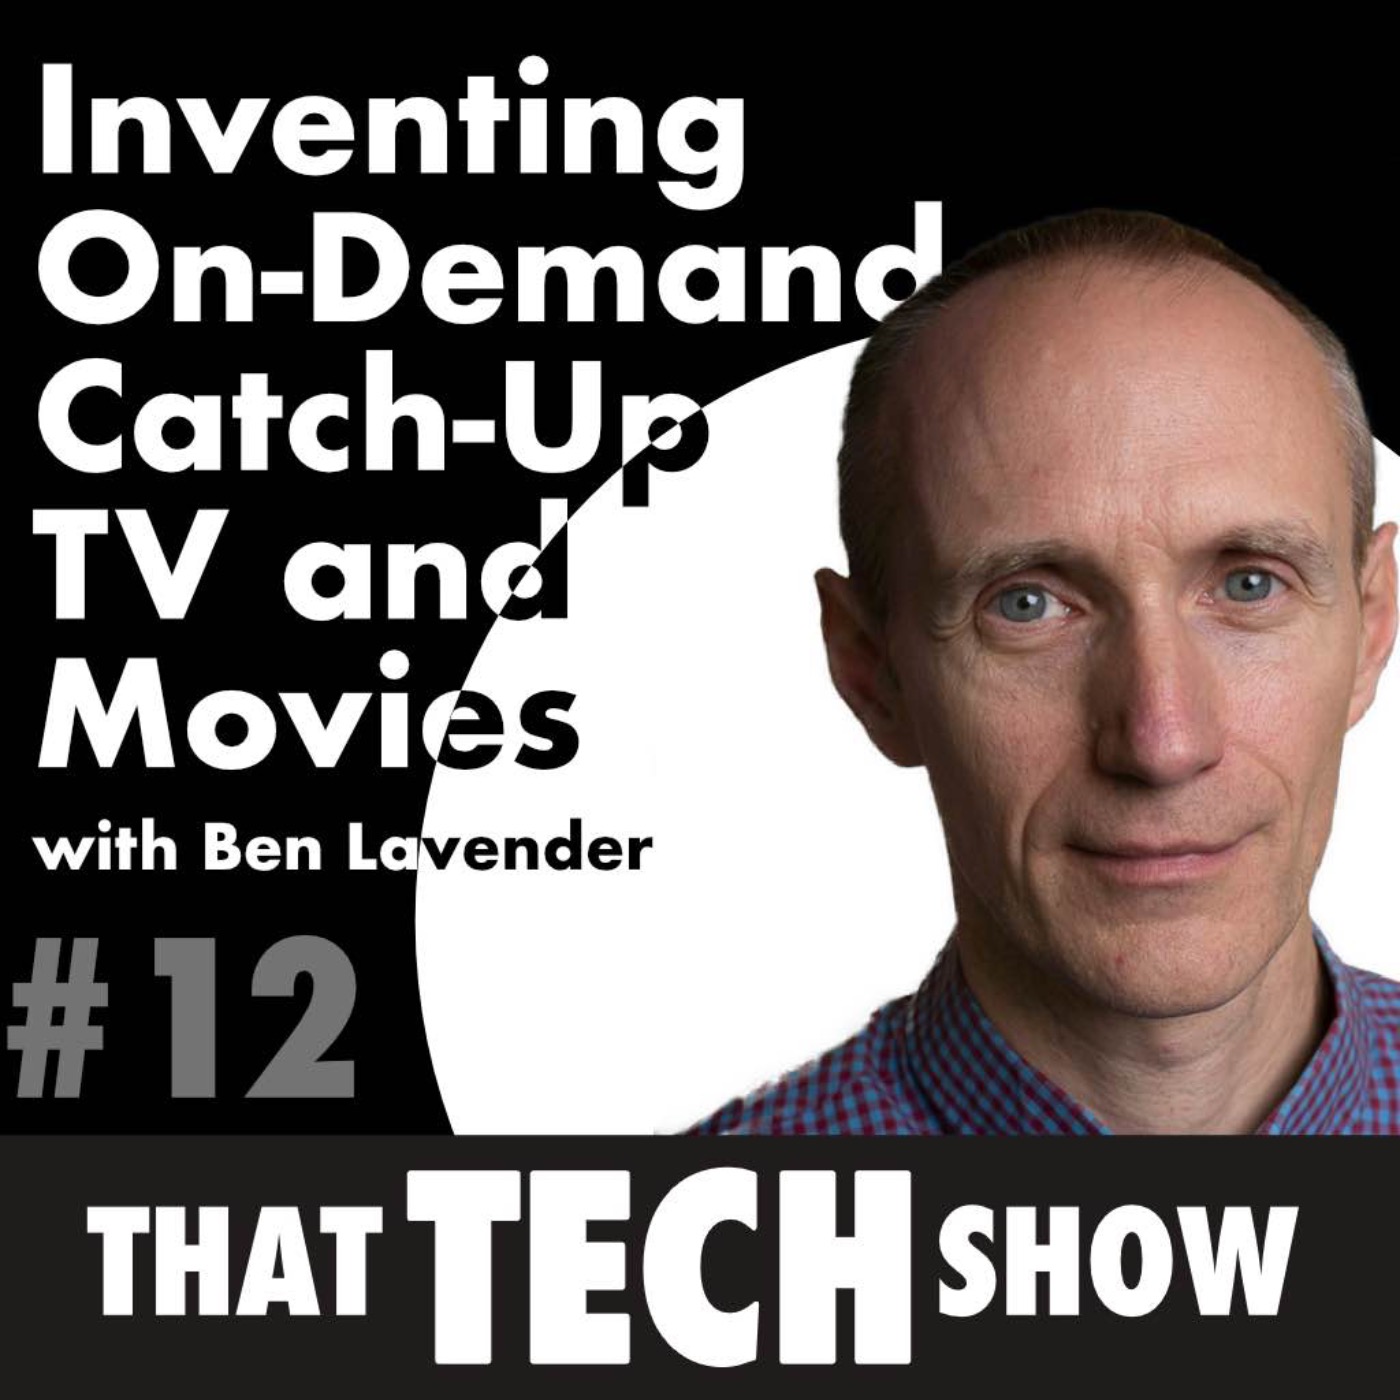 Episode 12 - Inventing on-demand catch-up TV and Movies at the BBC with Ben Lavender